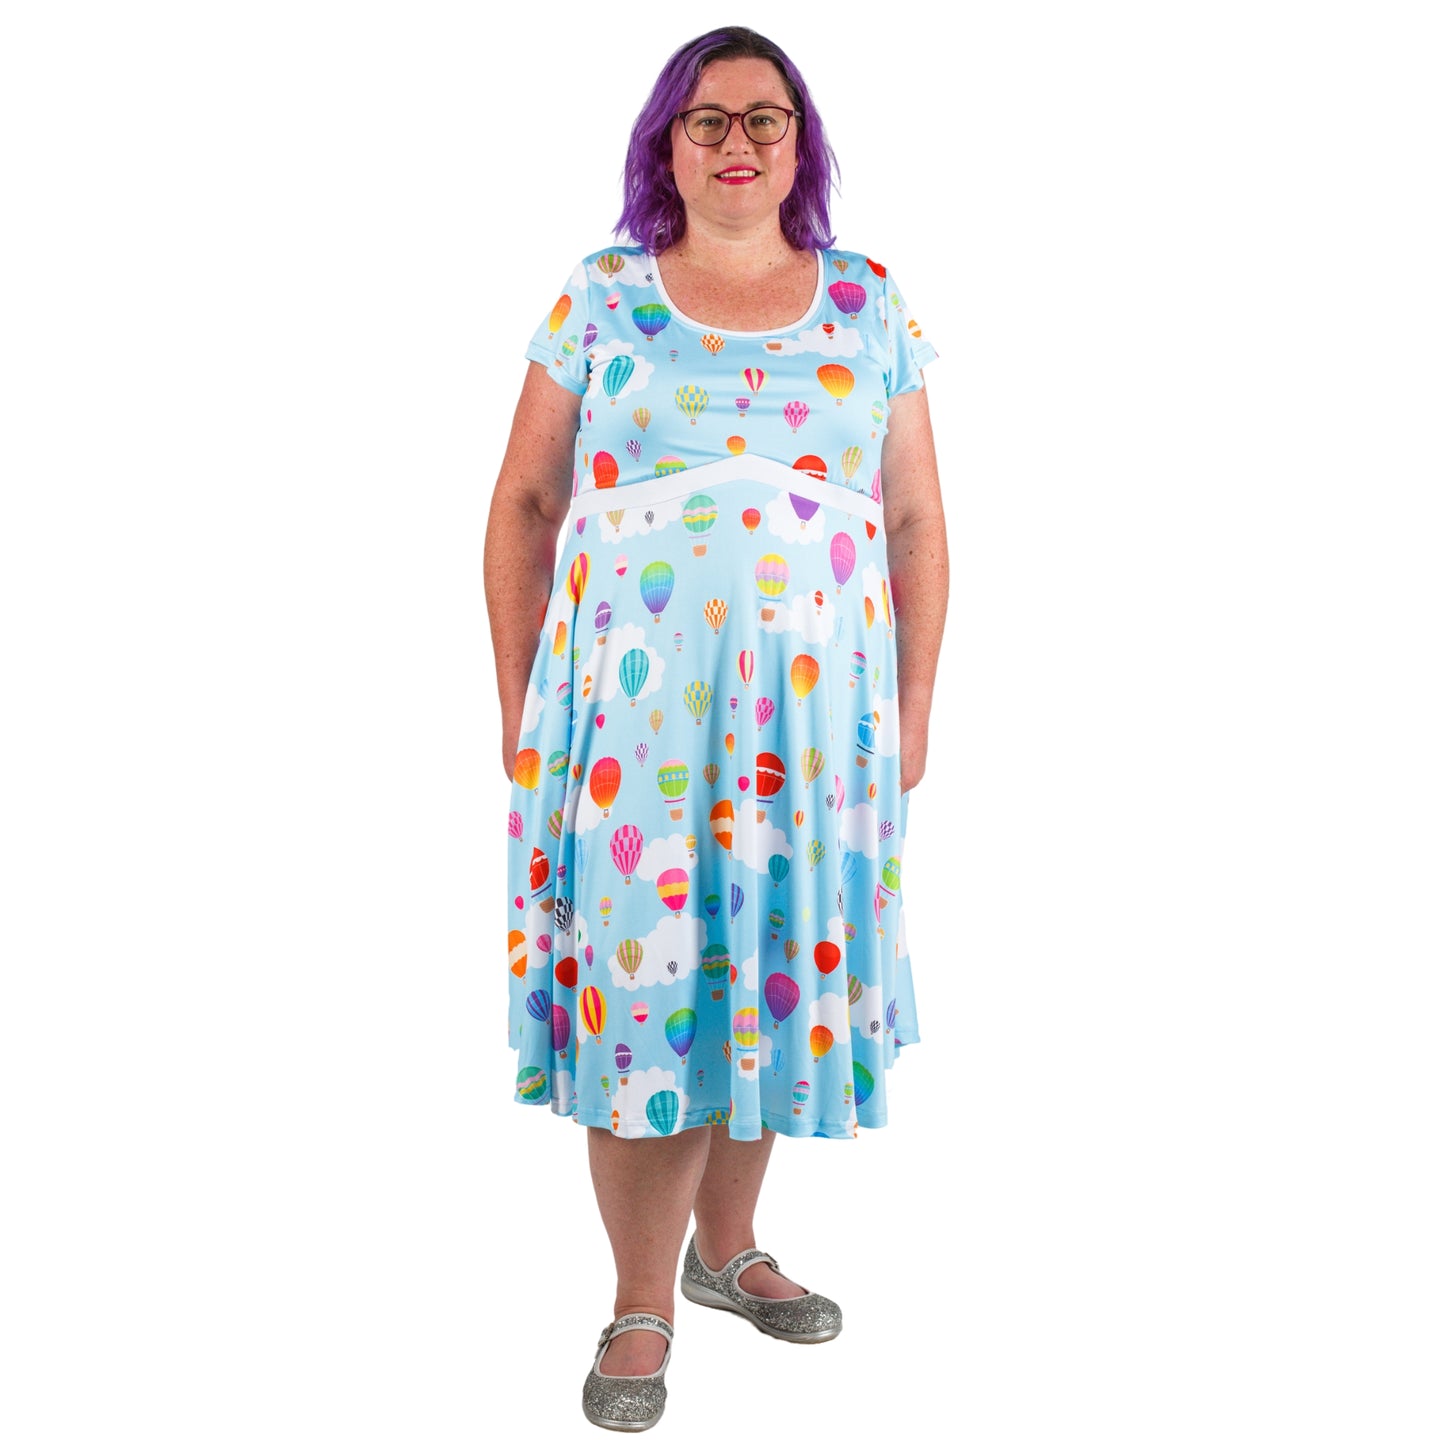 Whimsy Tea Dress by RainbowsAndFairies.com (Balloons - Hot Air Balloon - Dress With Pockets - Rockabilly - Vintage Inspired) - SKU: CL_TEADR_WHIMS_ORG - Pic 03